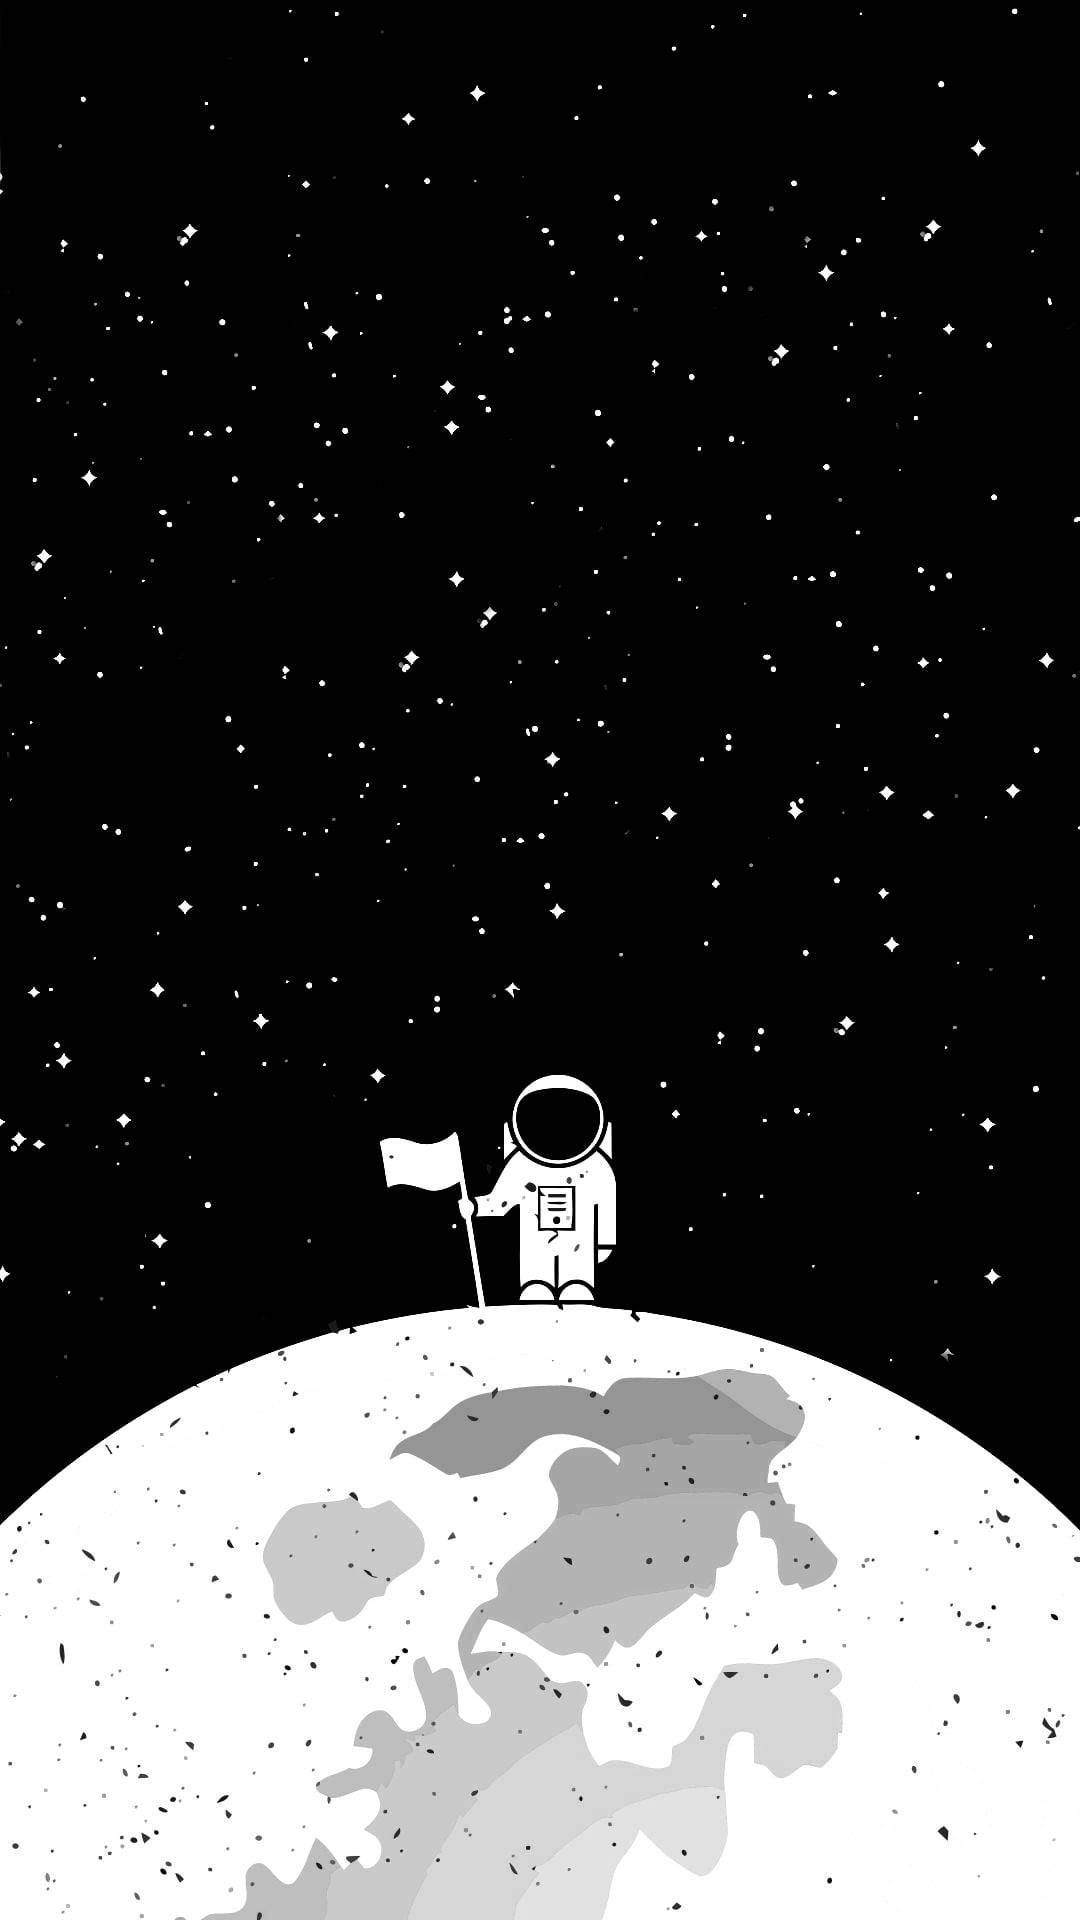 Astronaut And Moon Galaxy Iphone Background